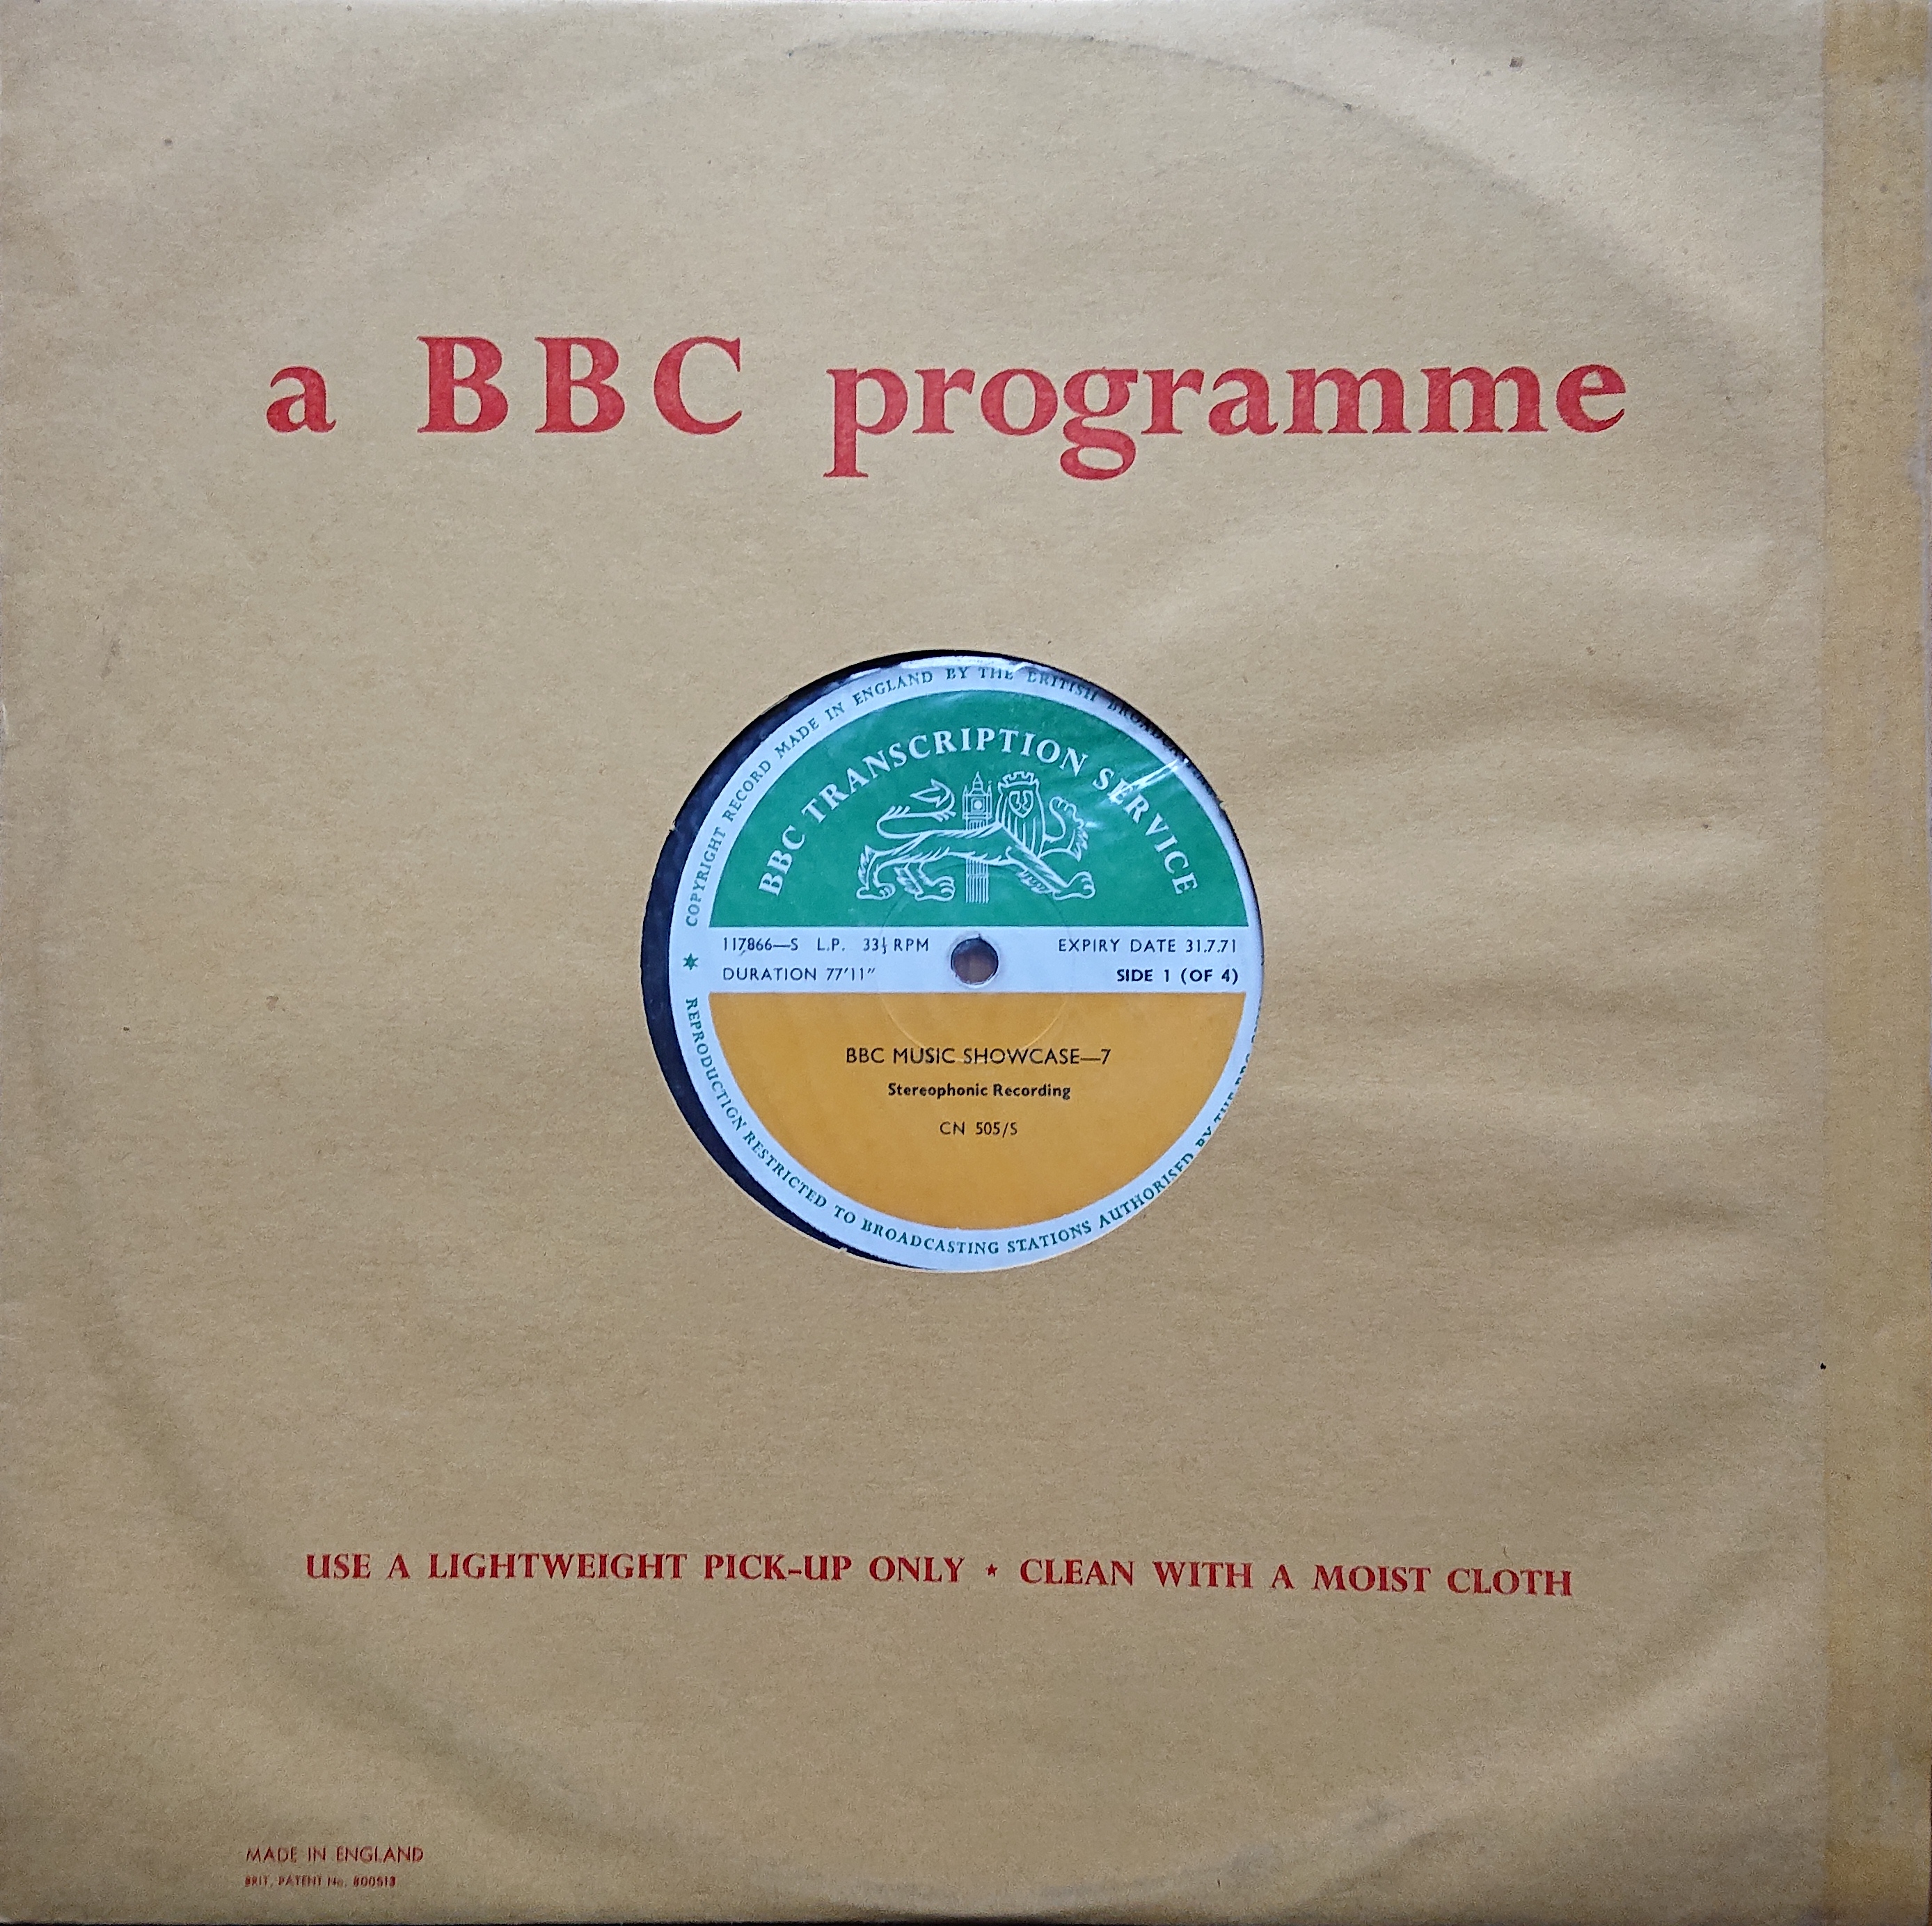 Picture of CN 505 S 13 BBC music showcase - 7 (Sides 1 & 3) by artist Various from the BBC records and Tapes library